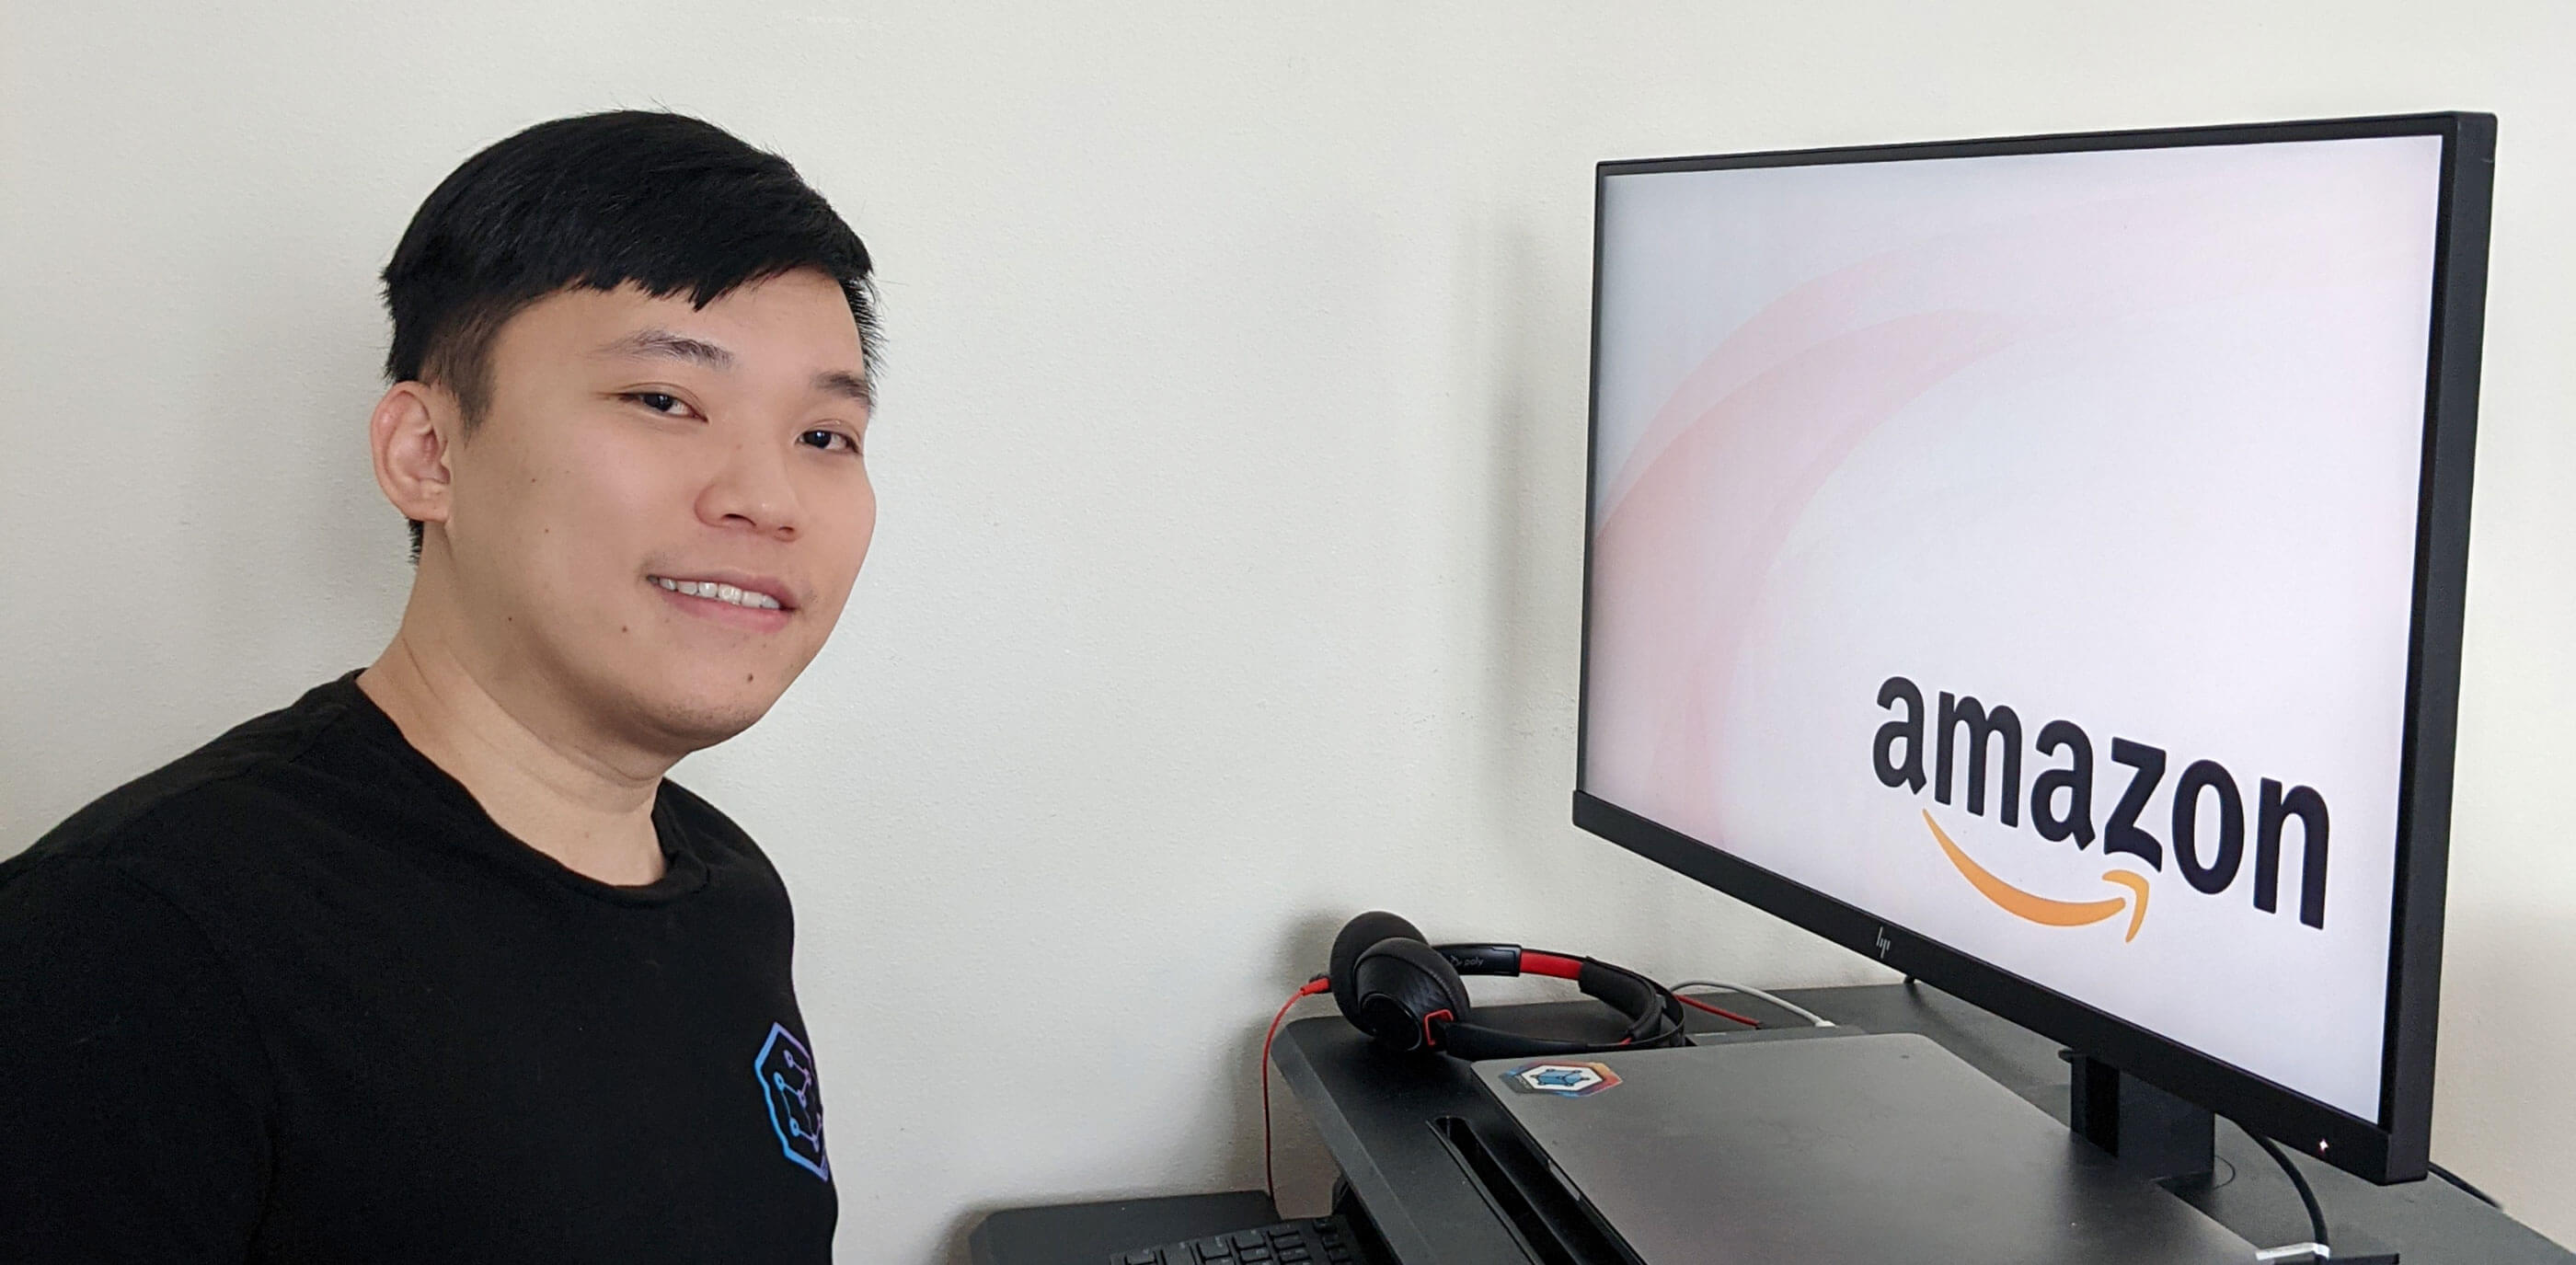 DigiPen Singapore alumni Thin Big Zong sits in front of PC with Amazon logo onscreen